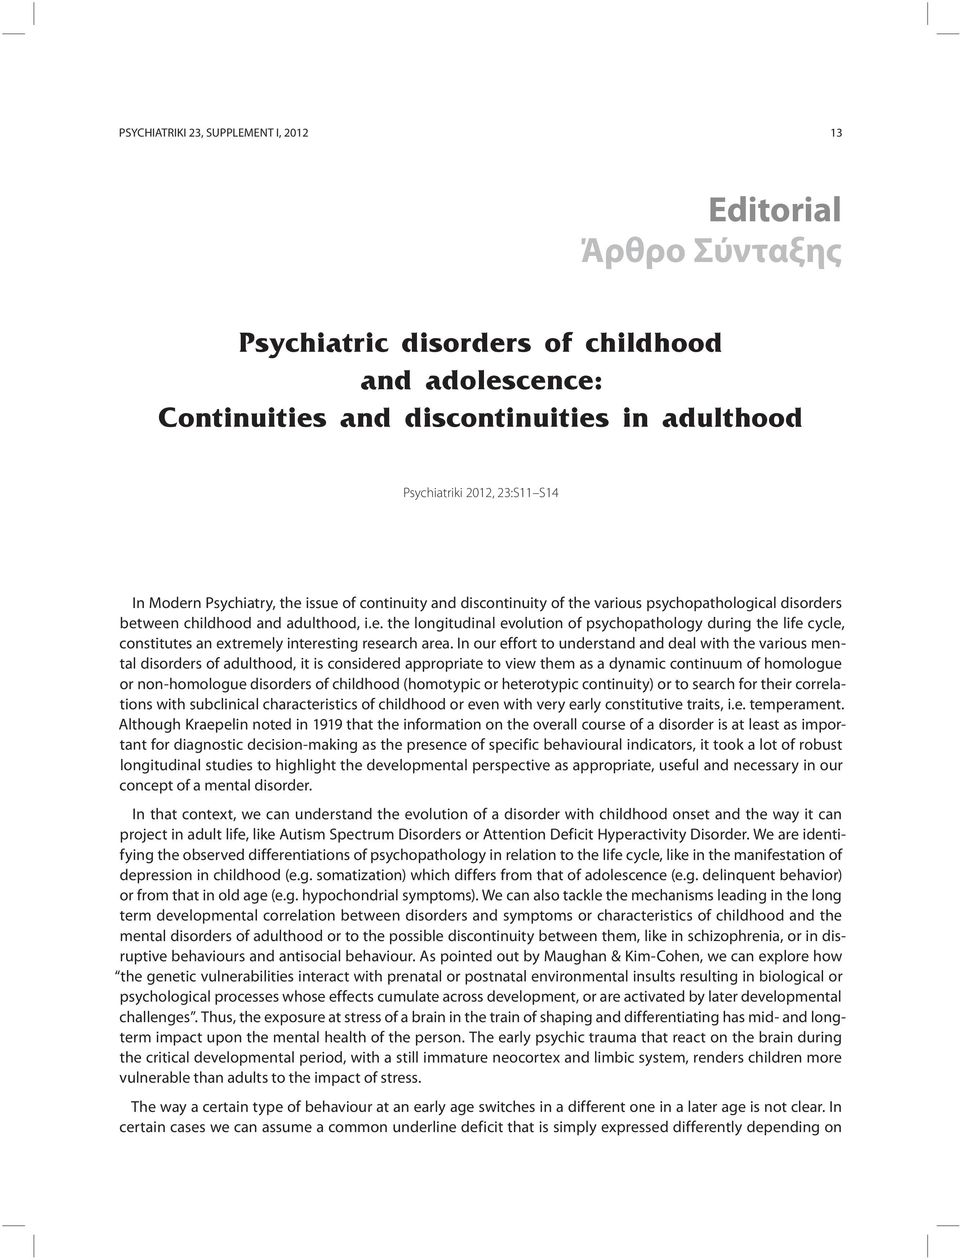 In our effort to understand and deal with the various mental disorders of adulthood, it is considered appropriate to view them as a dynamic continuum of homologue or non-homologue disorders of